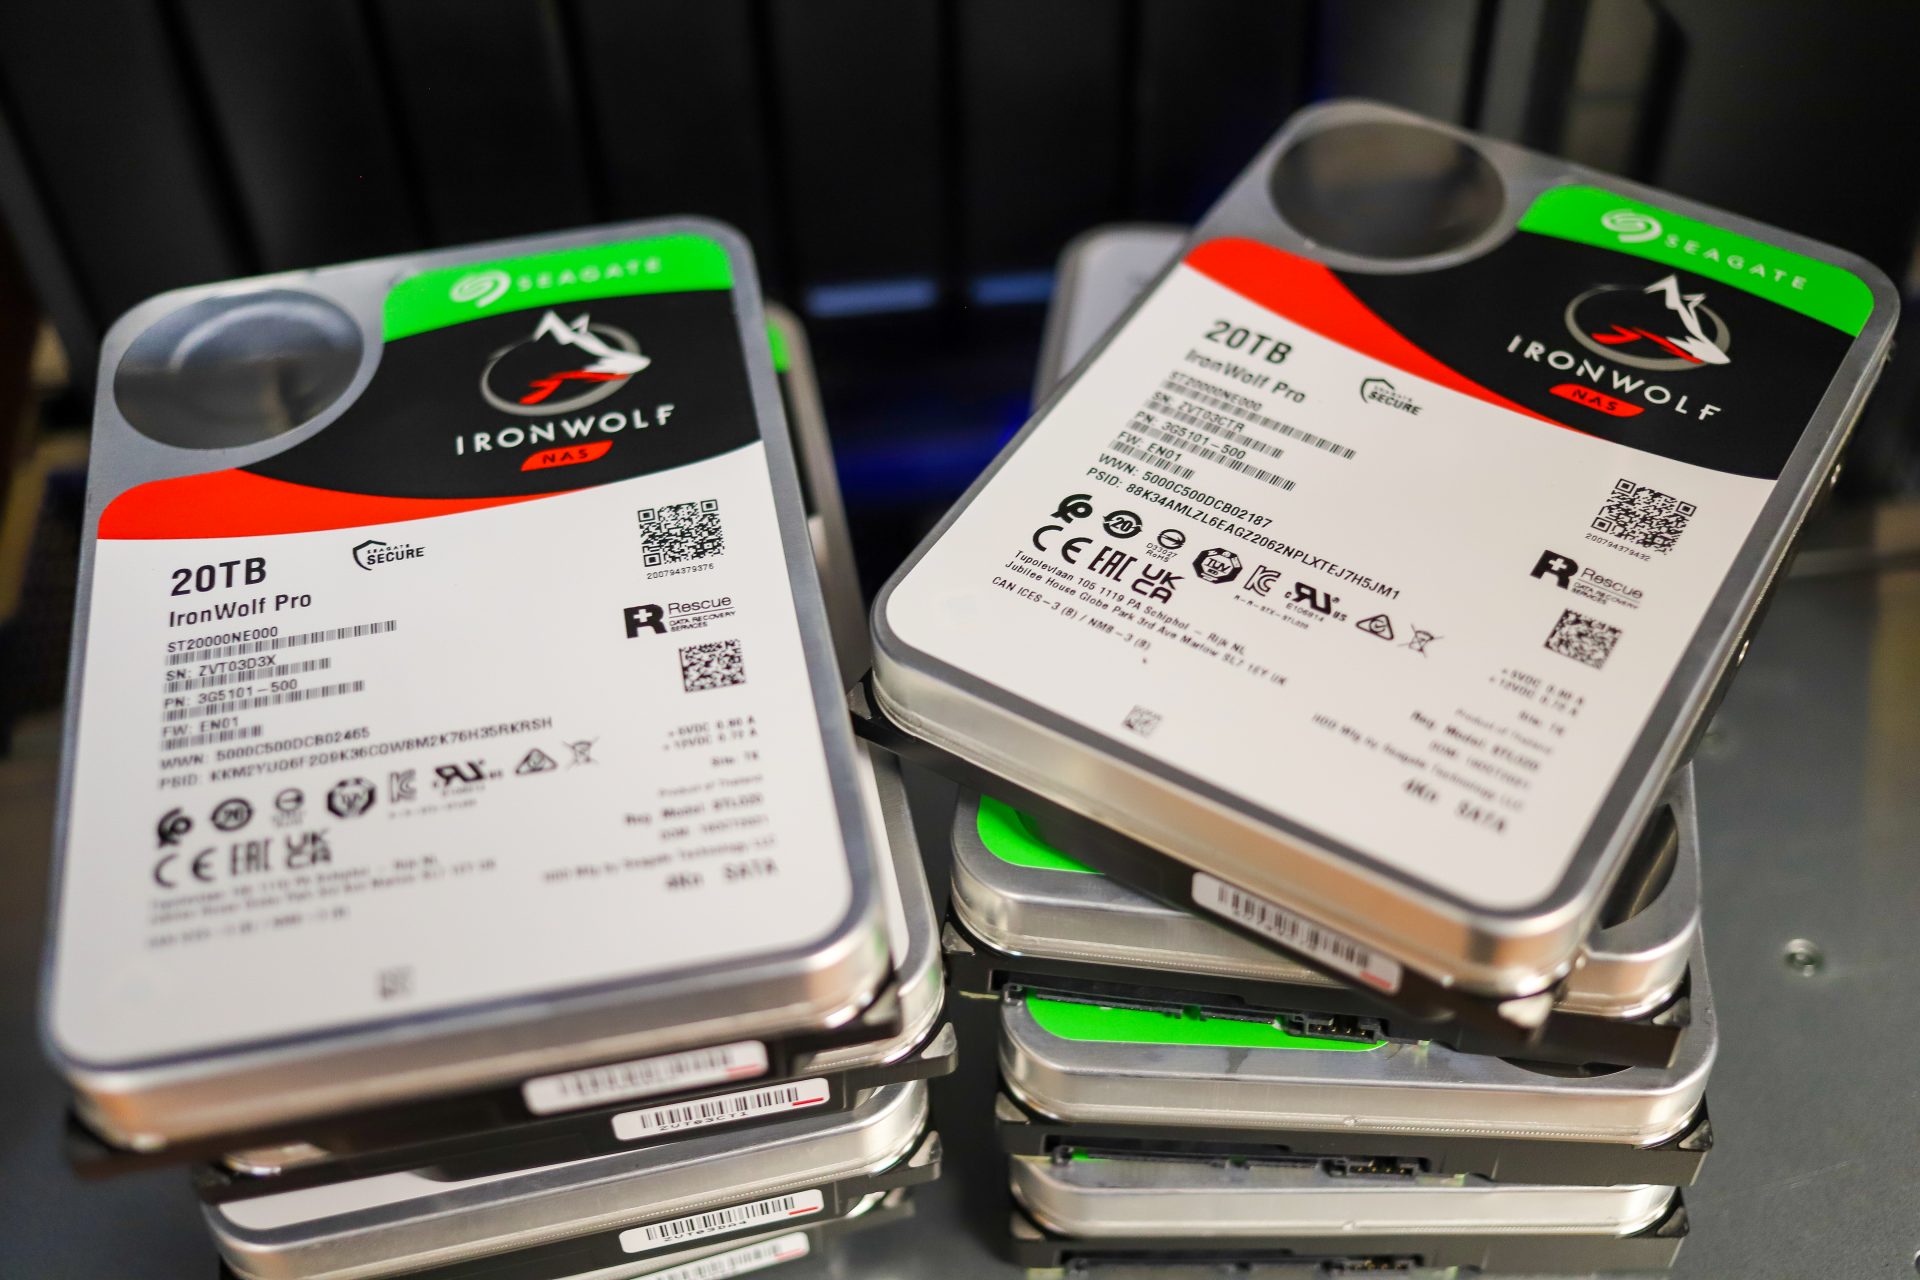 Seagate 20TB NAS HDD Review - StorageReview.com